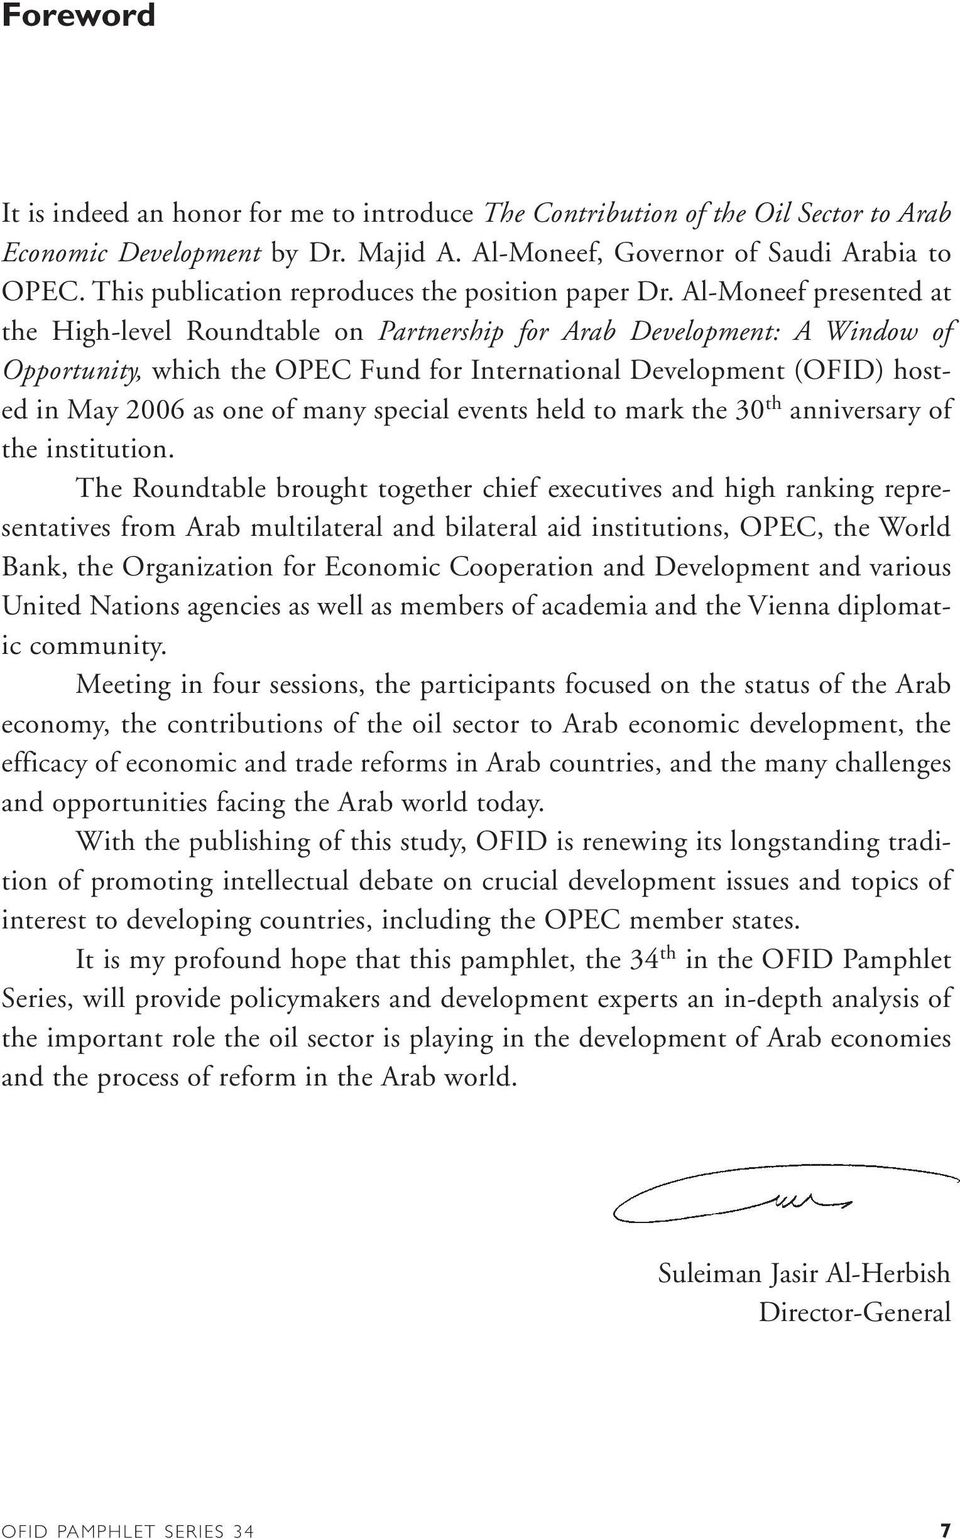 Al-Moneef presented at the High-level Roundtable on Partnership for Arab Development: A Window of Opportunity, which the OPEC Fund for International Development (OFID) hosted in May 2006 as one of